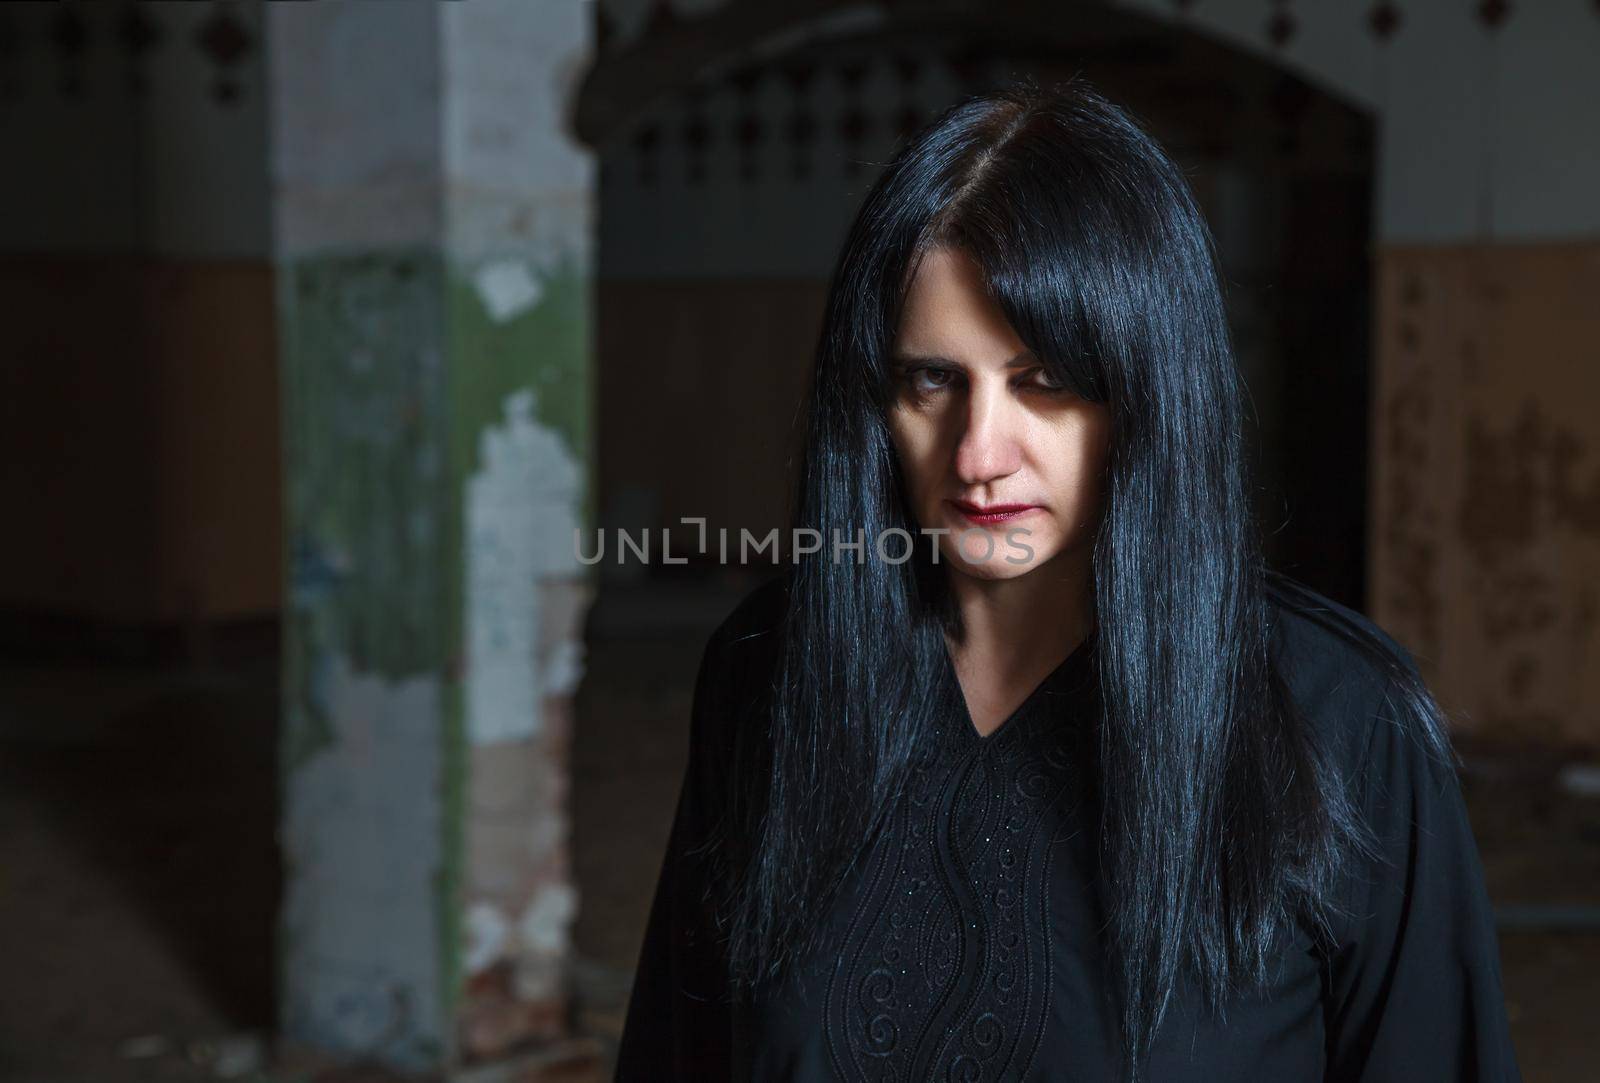 portrait of young goth woman in an abandoned building. indoor closeup